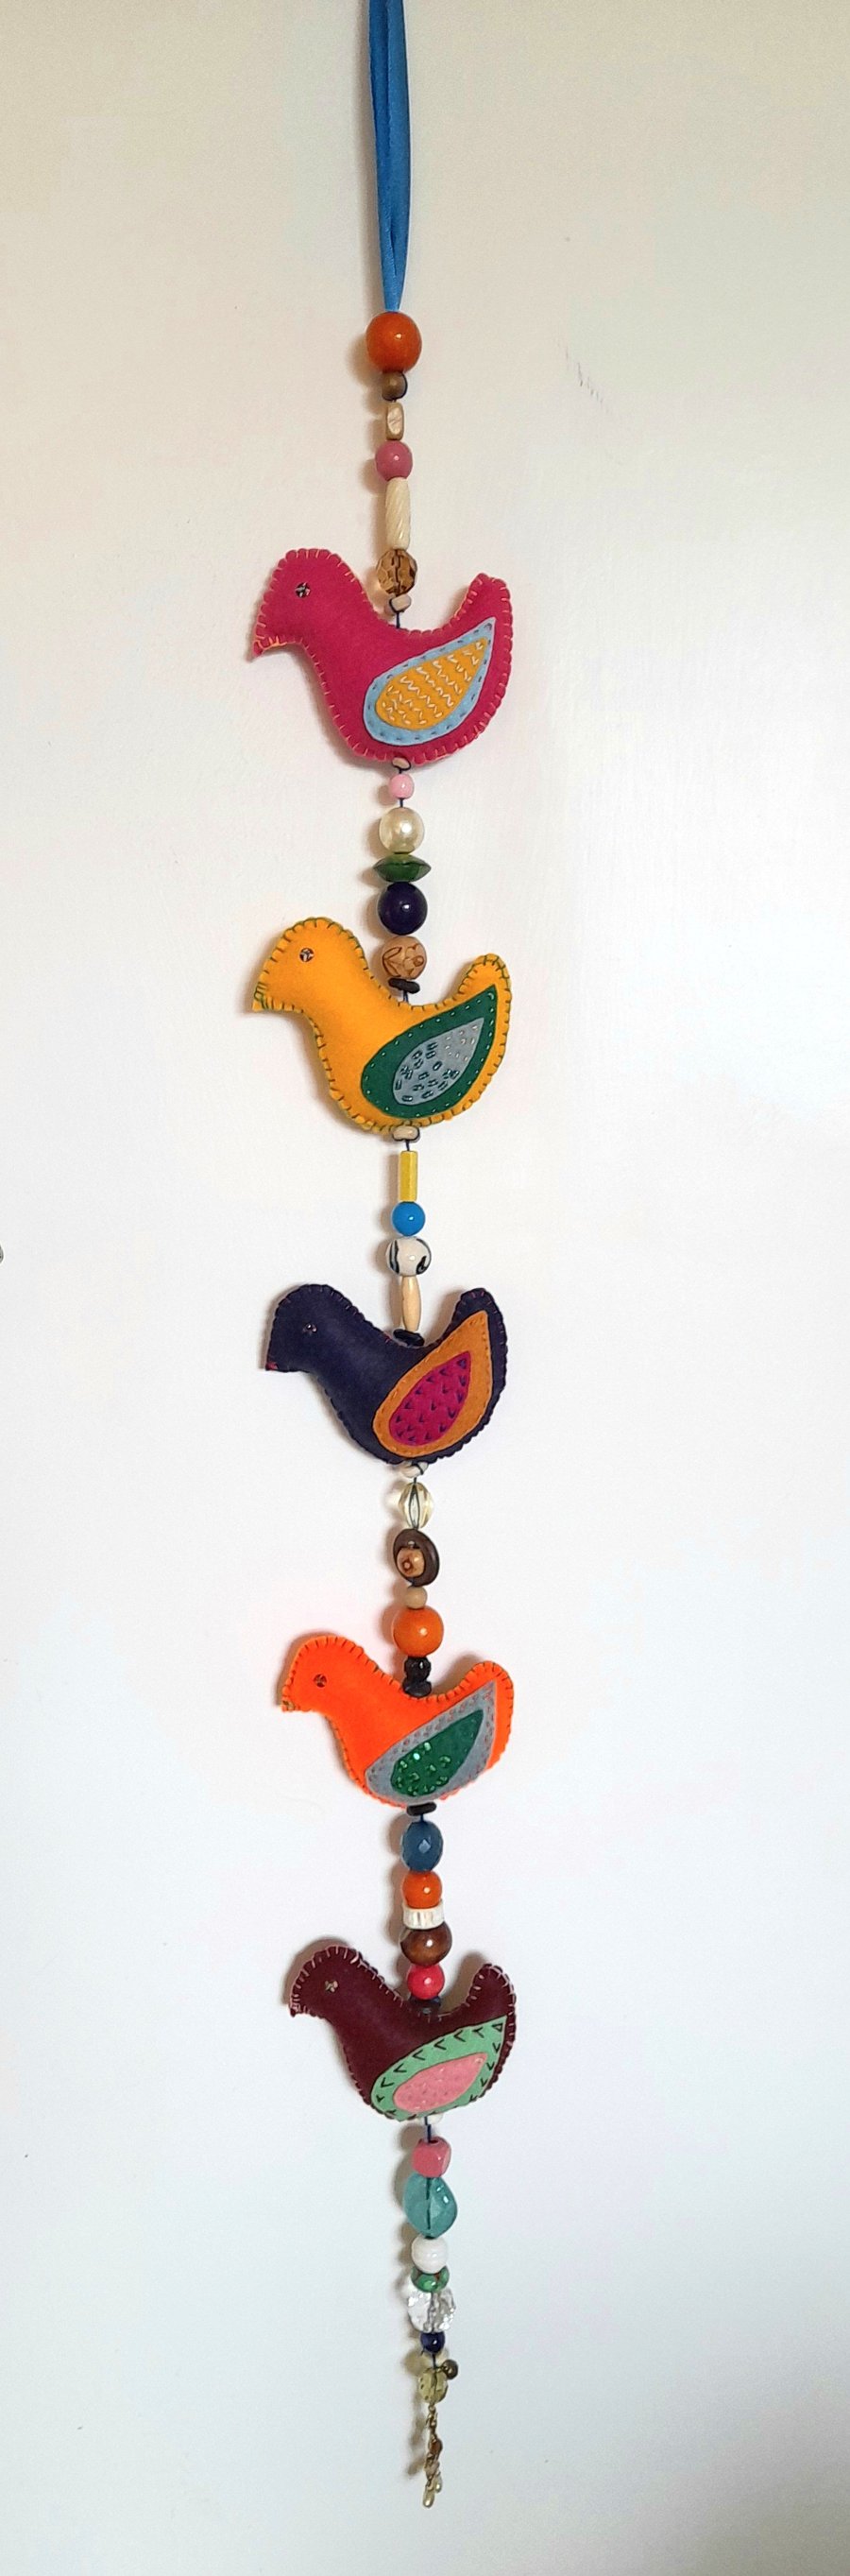 Sweet Tweets - A skein of decorated felt birds, joined with beads, ready to hang